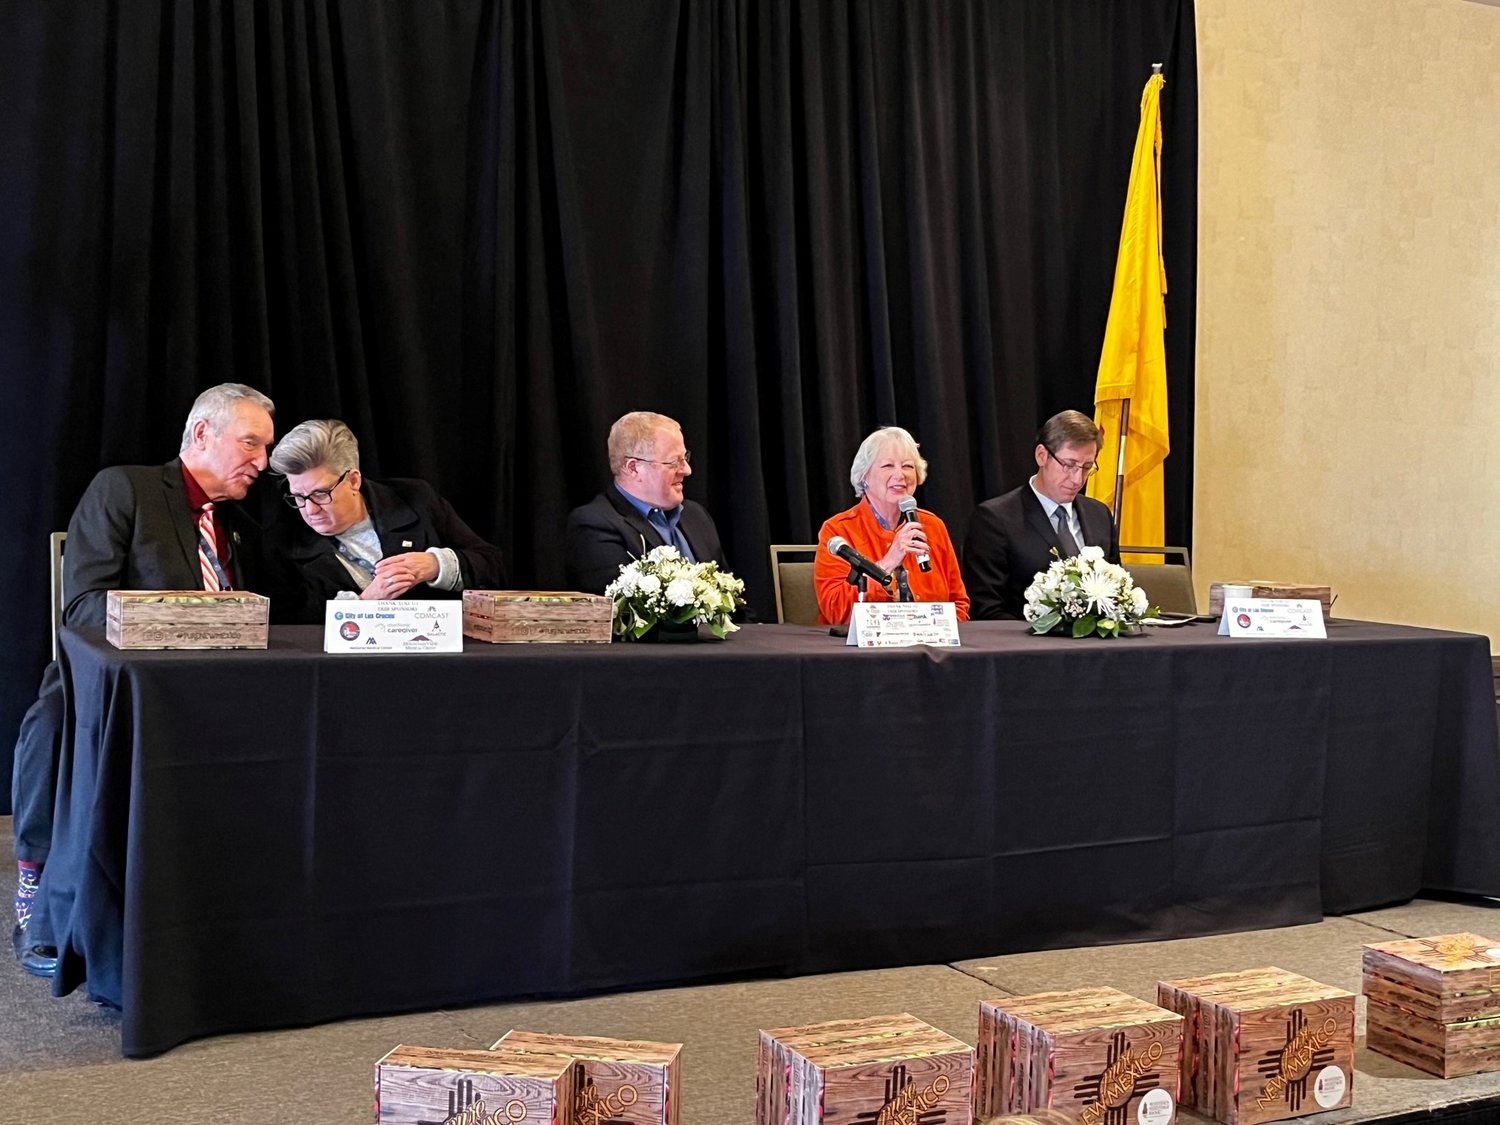 State Sens. Bill Soules, Carrie Hamblen and Jeff Steinborn joined State Reps. Joanne Ferrary and Nathan Small on a panel discussion to discuss legislative priorities for 2023.